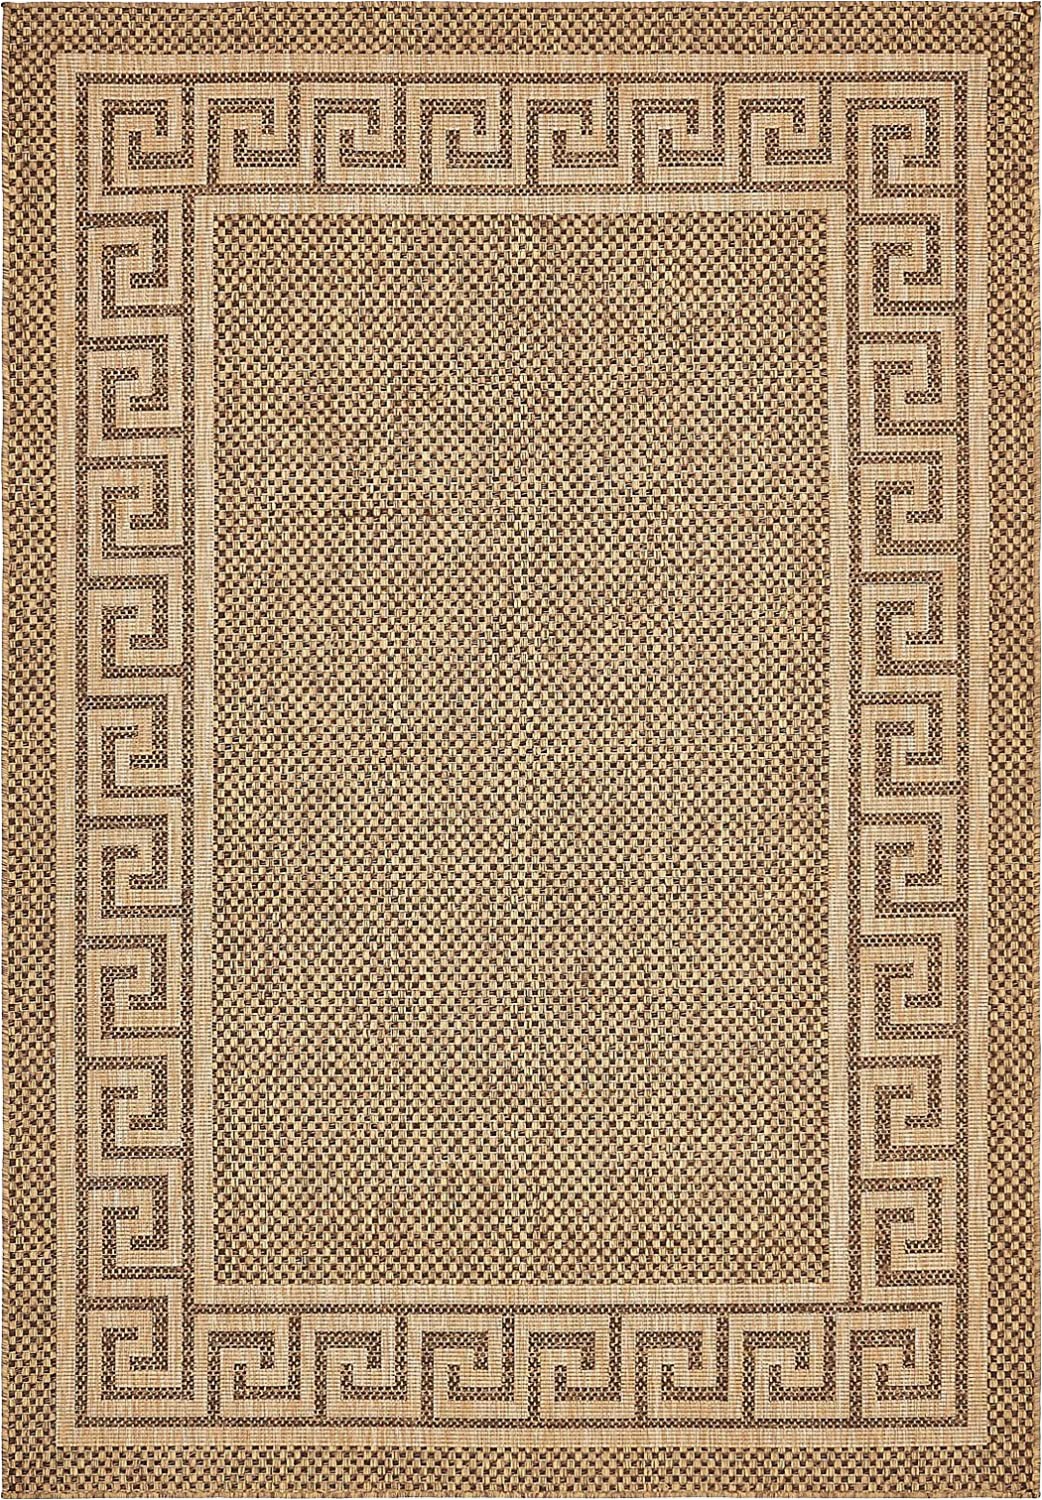 9 Foot Square area Rugs Outdoor Collection area Rug Brown 6 X 9 Feet Perfect for Indoor & Outdoor Rugs Garden and Pool area Camping Picnic Carpet